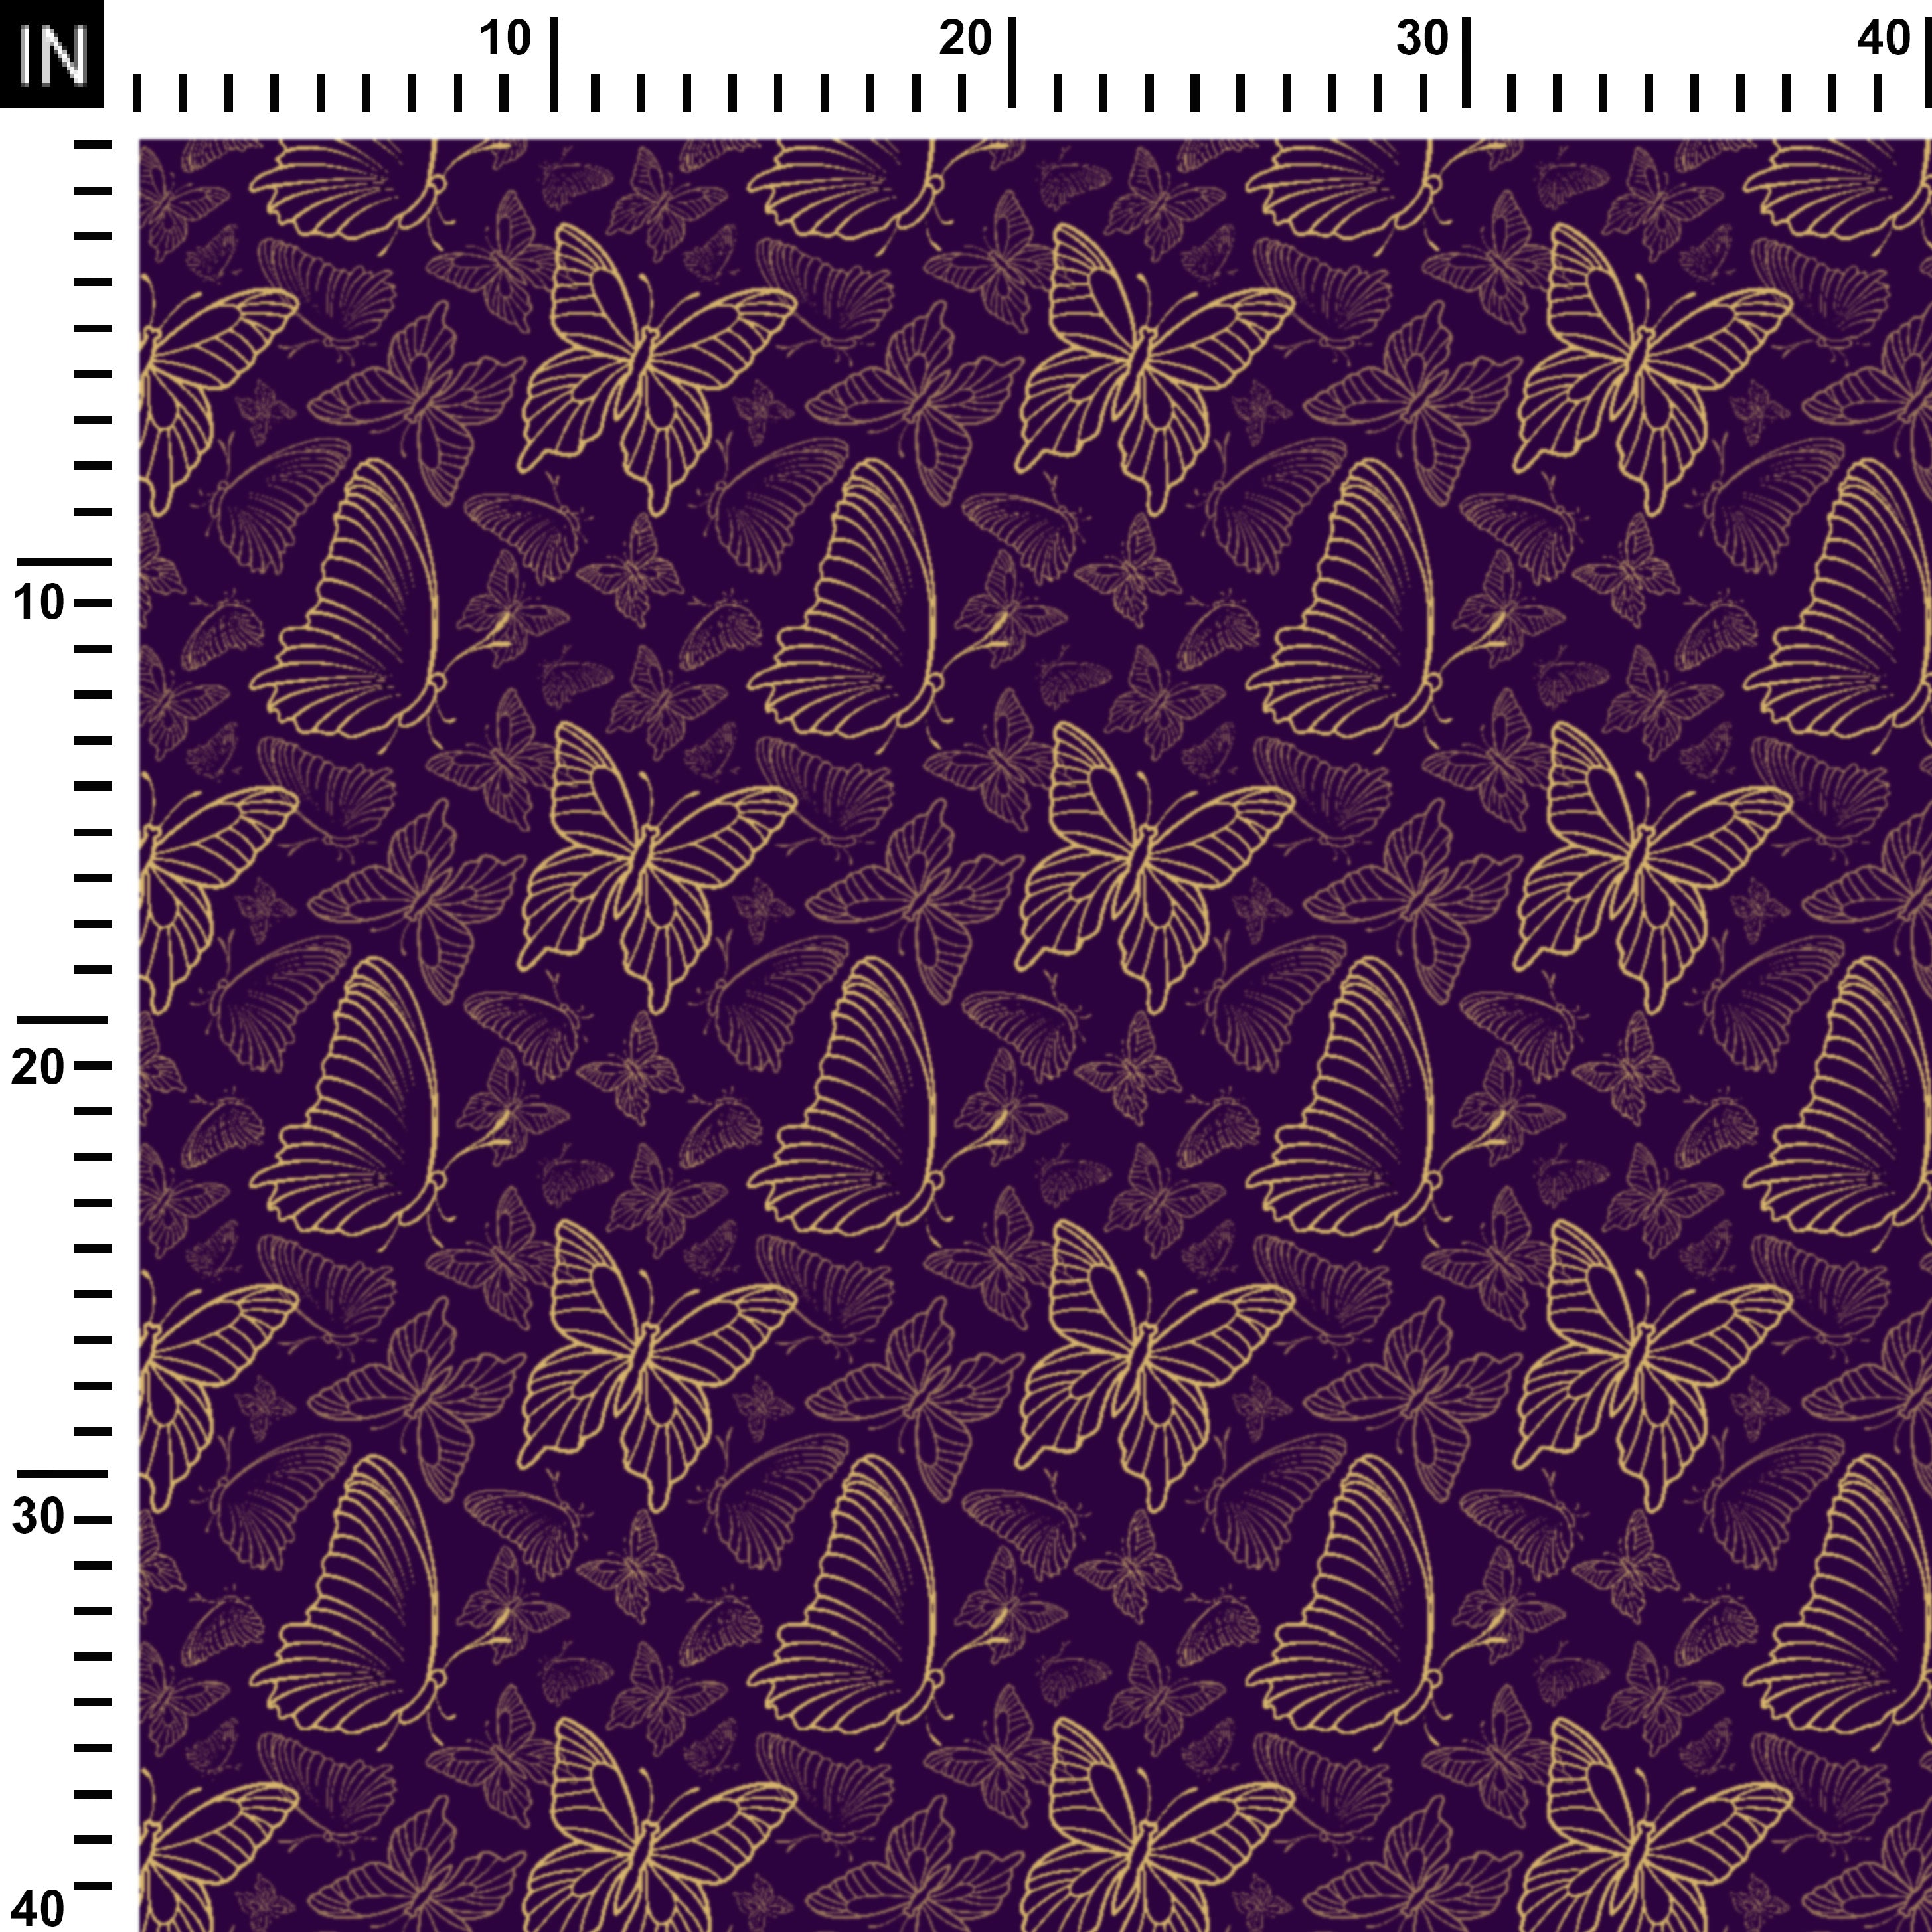 Butterfly Gold embossed Purple